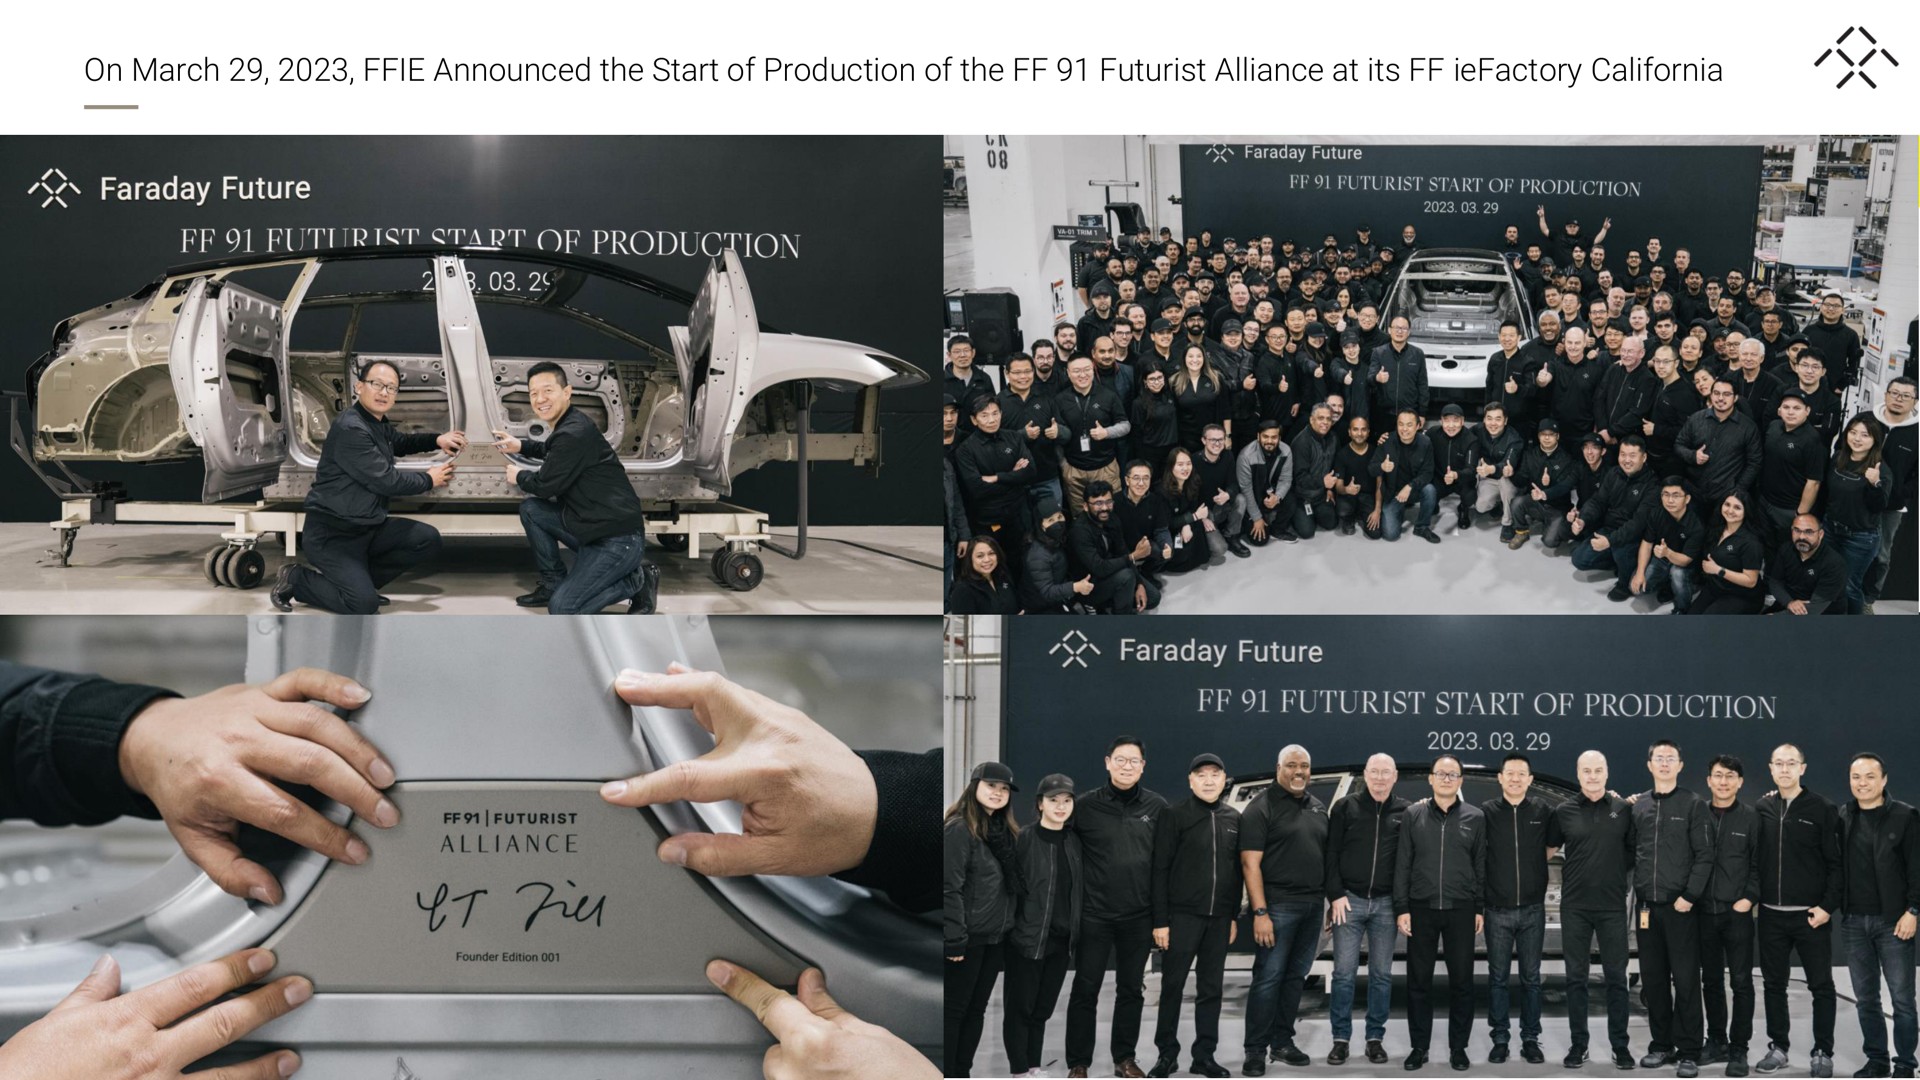 on march announced the start of production of the futurist alliance at its design to review wee ate apt an pad ted a ies a | Faraday Future